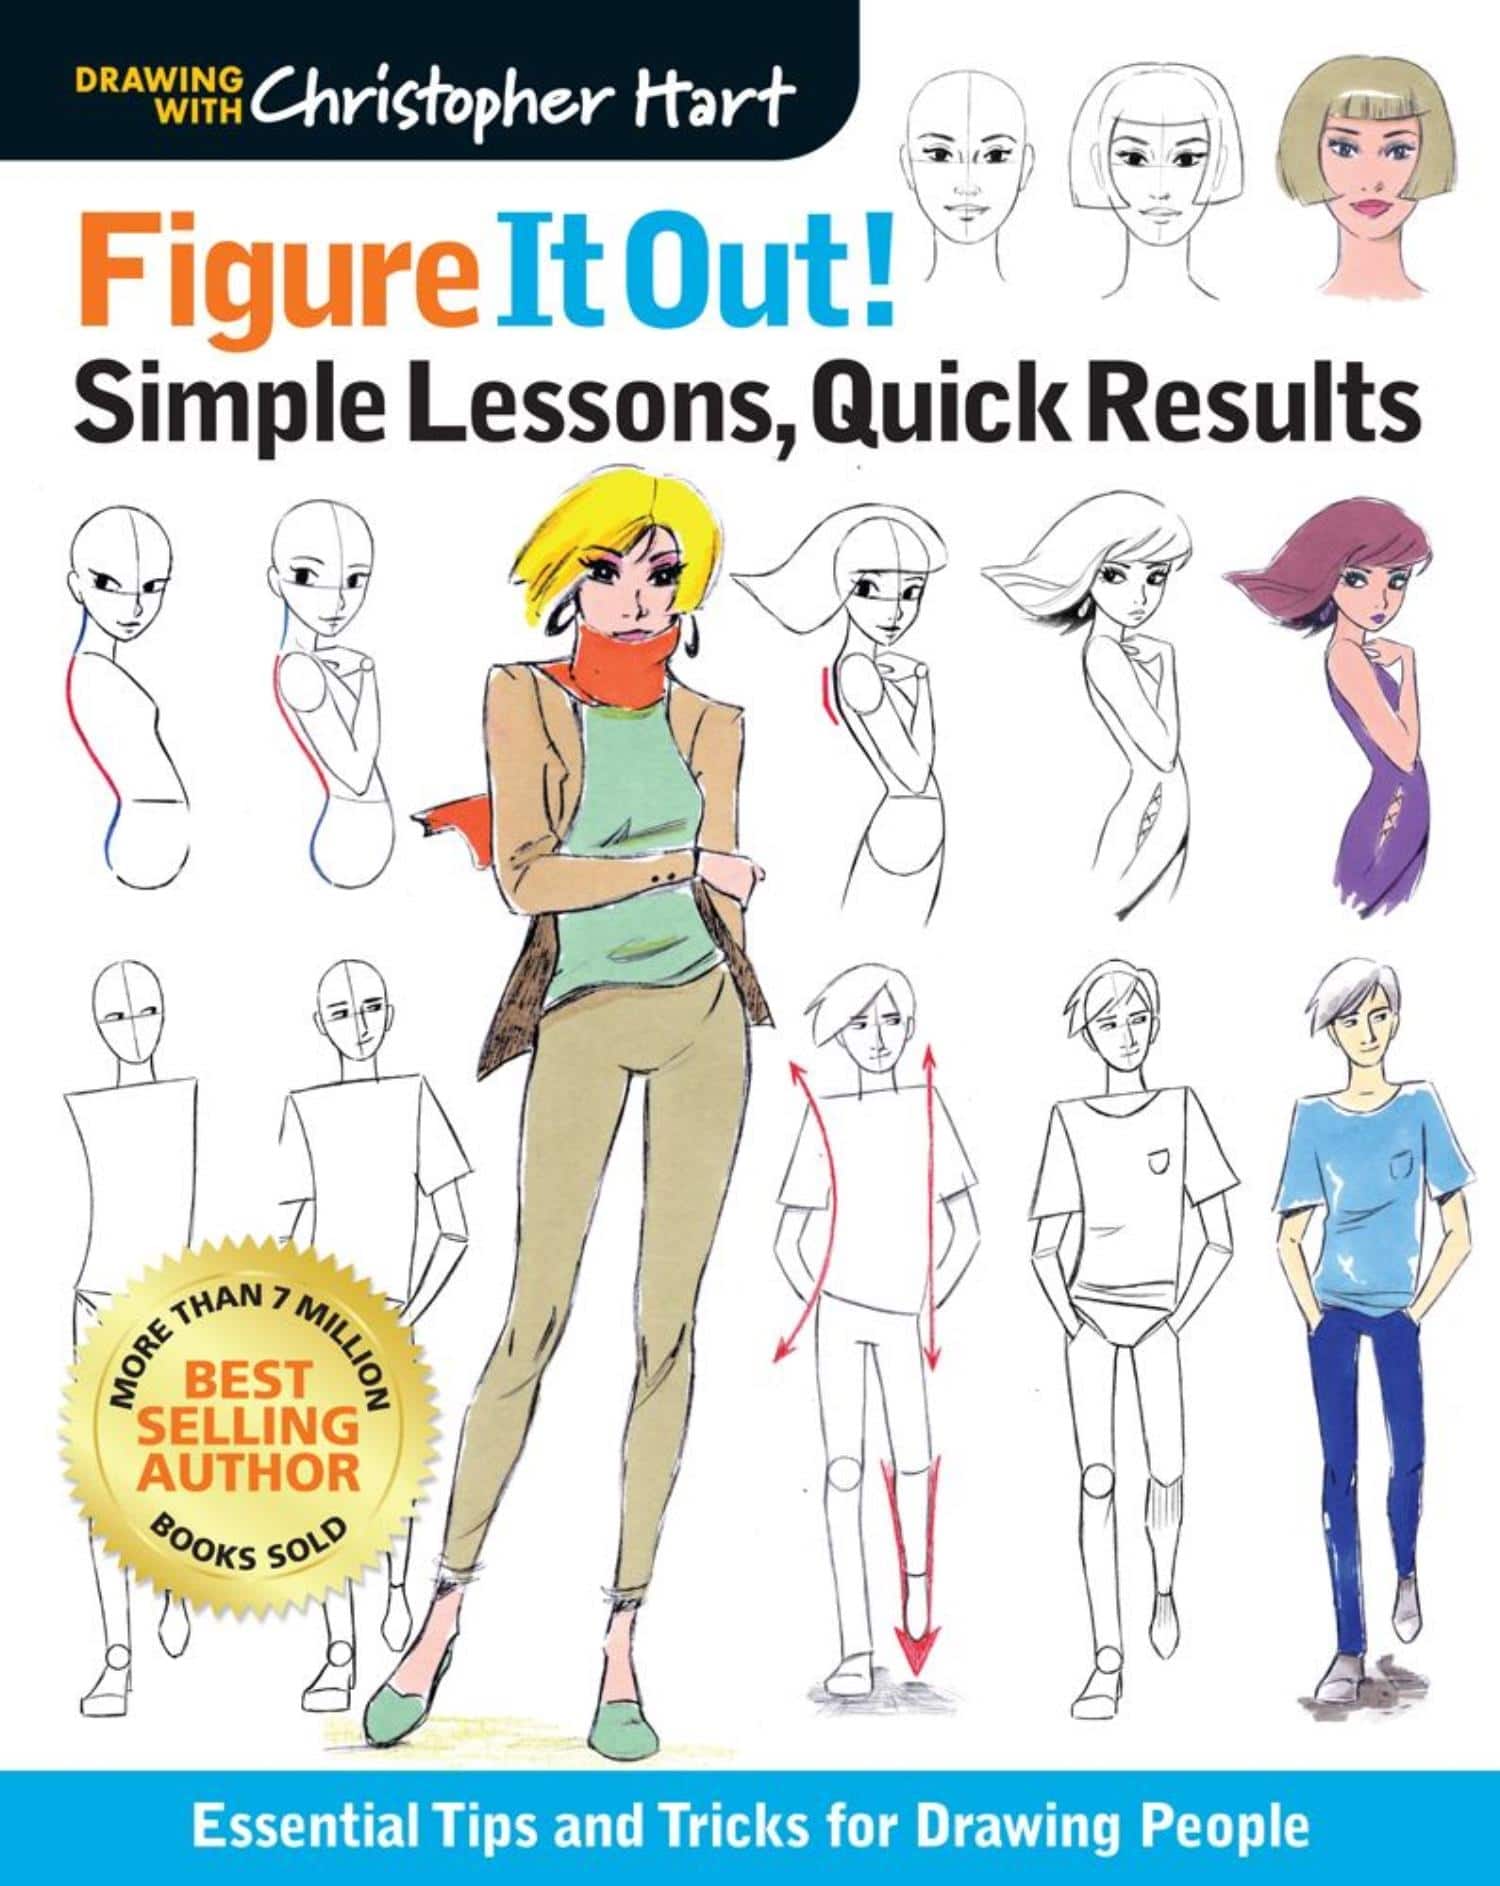 Figure-It-Out-Simple-Lessons-Quick-Results-Essential-Tips-and-Tricks-for-Drawing-People-Christopher-Hart-Figure-It-Out